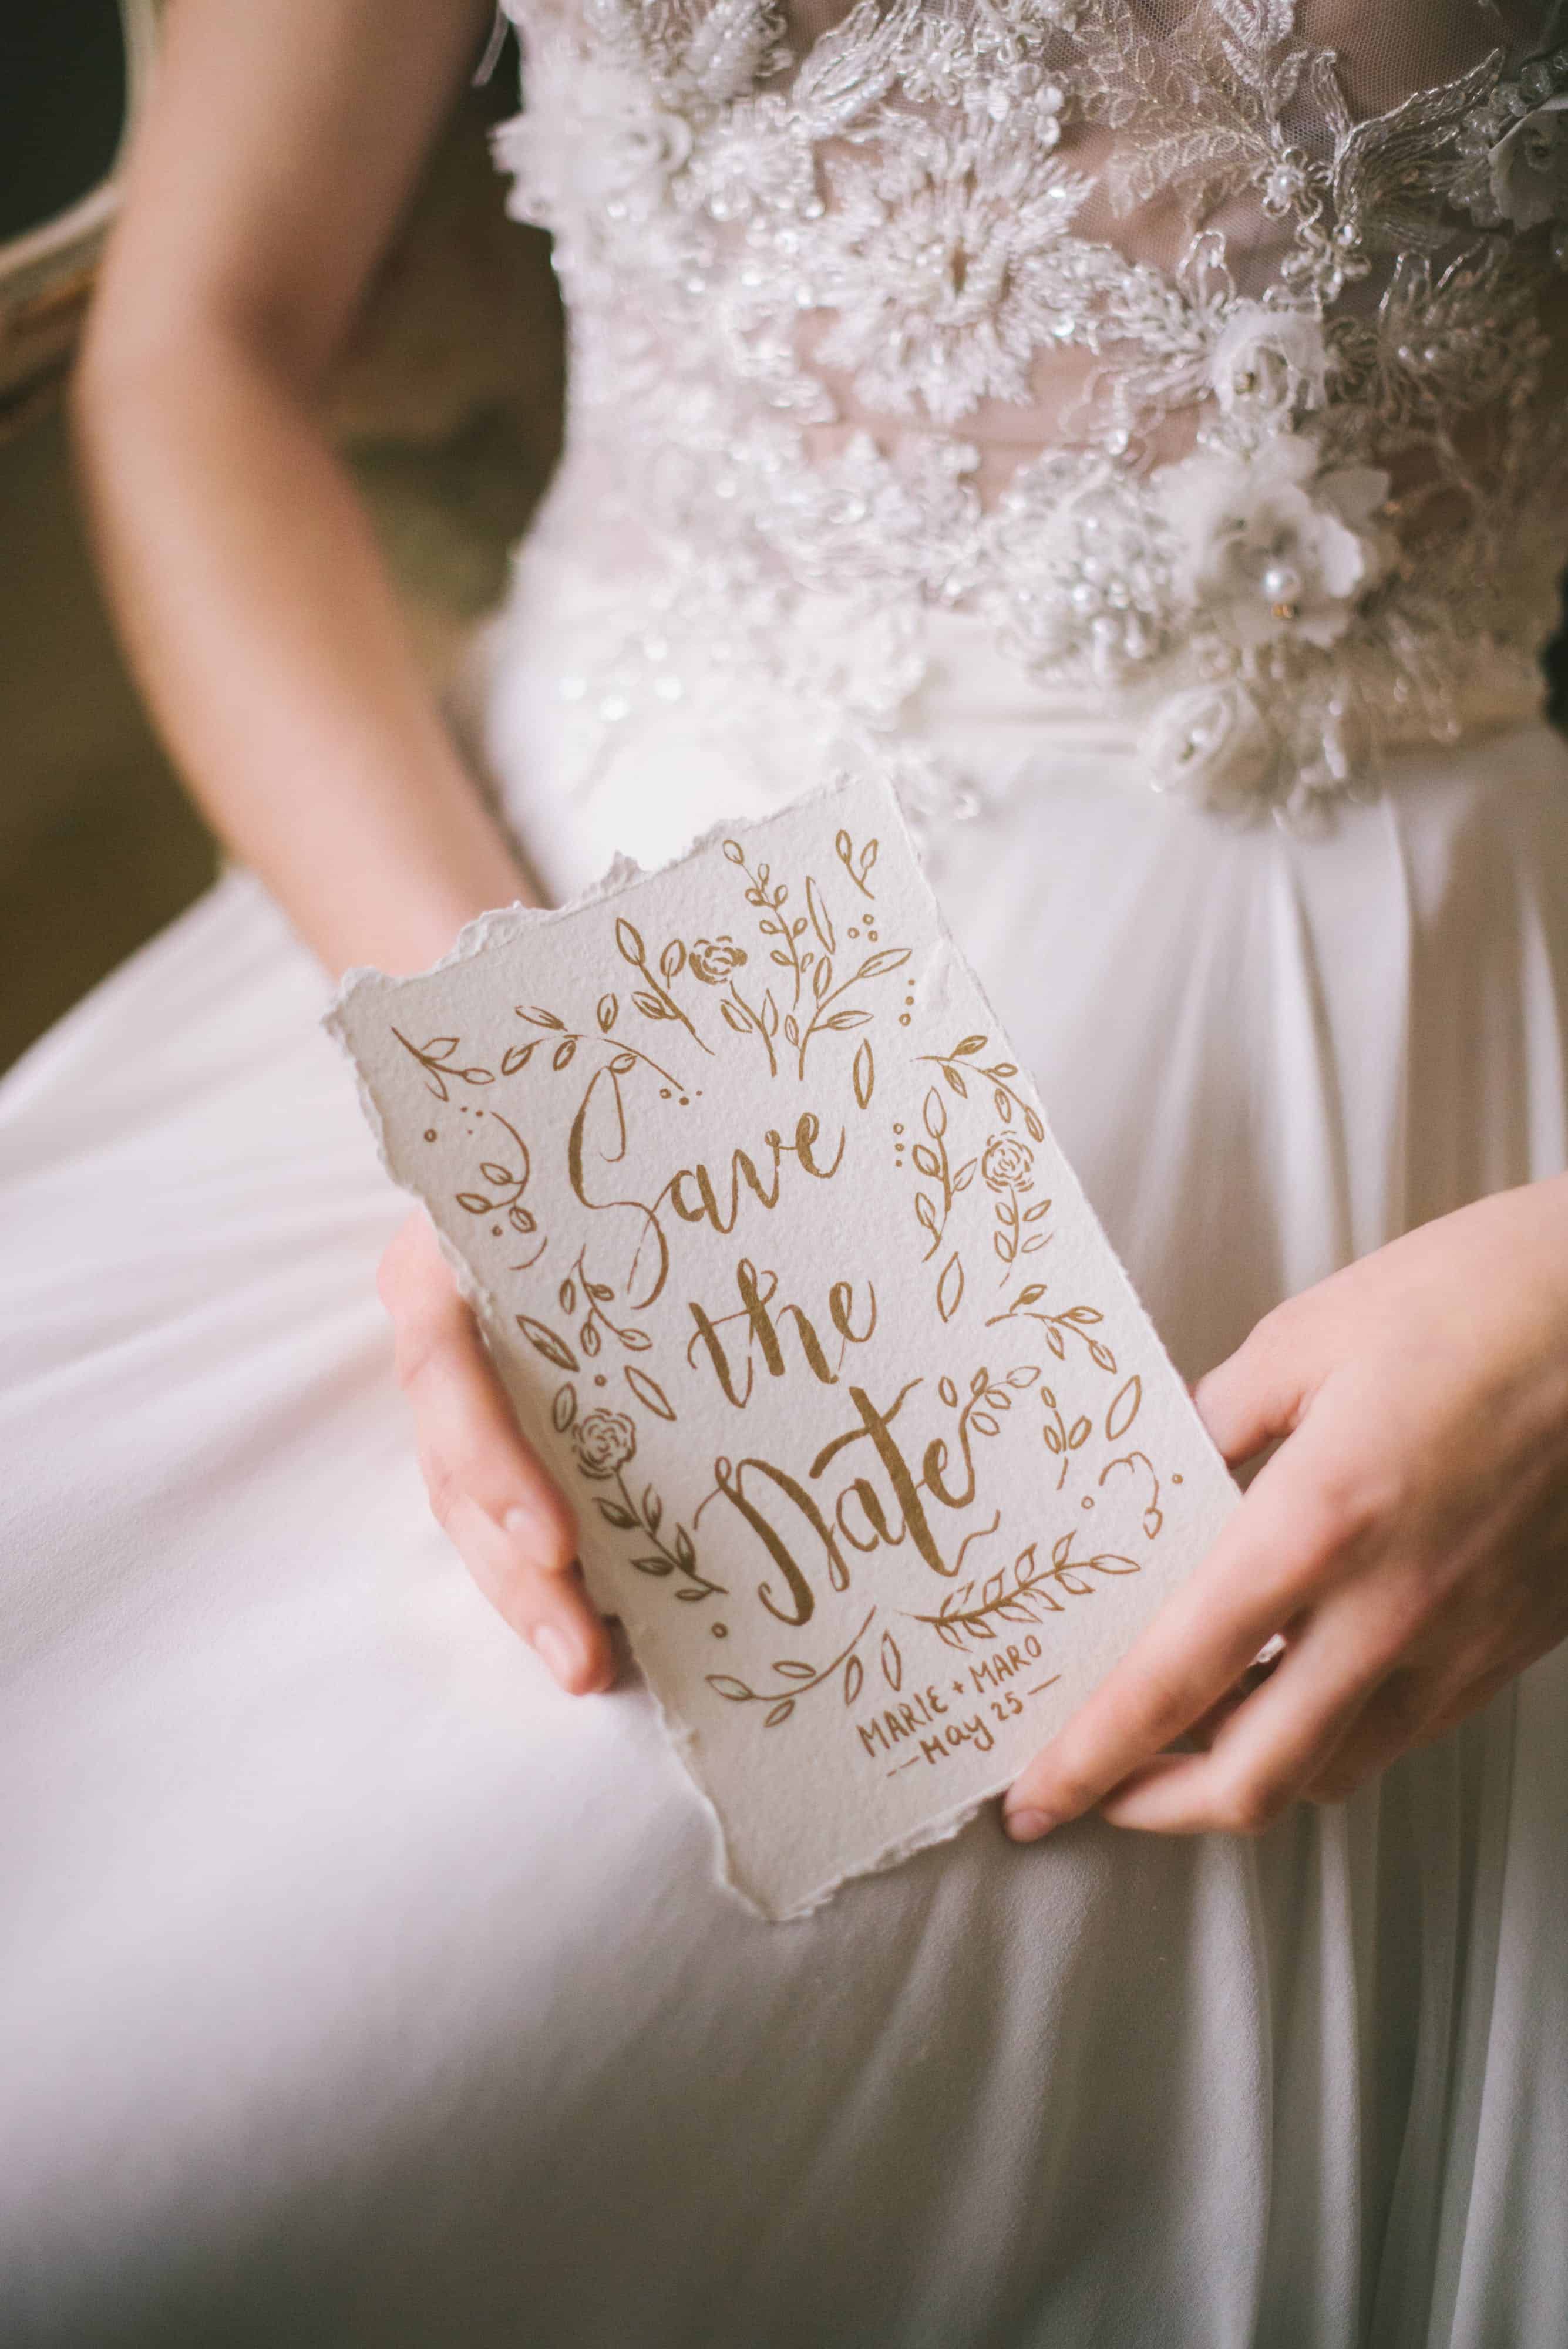 Free Woman in White Dress Holding a Wedding Invitation Stock Photo